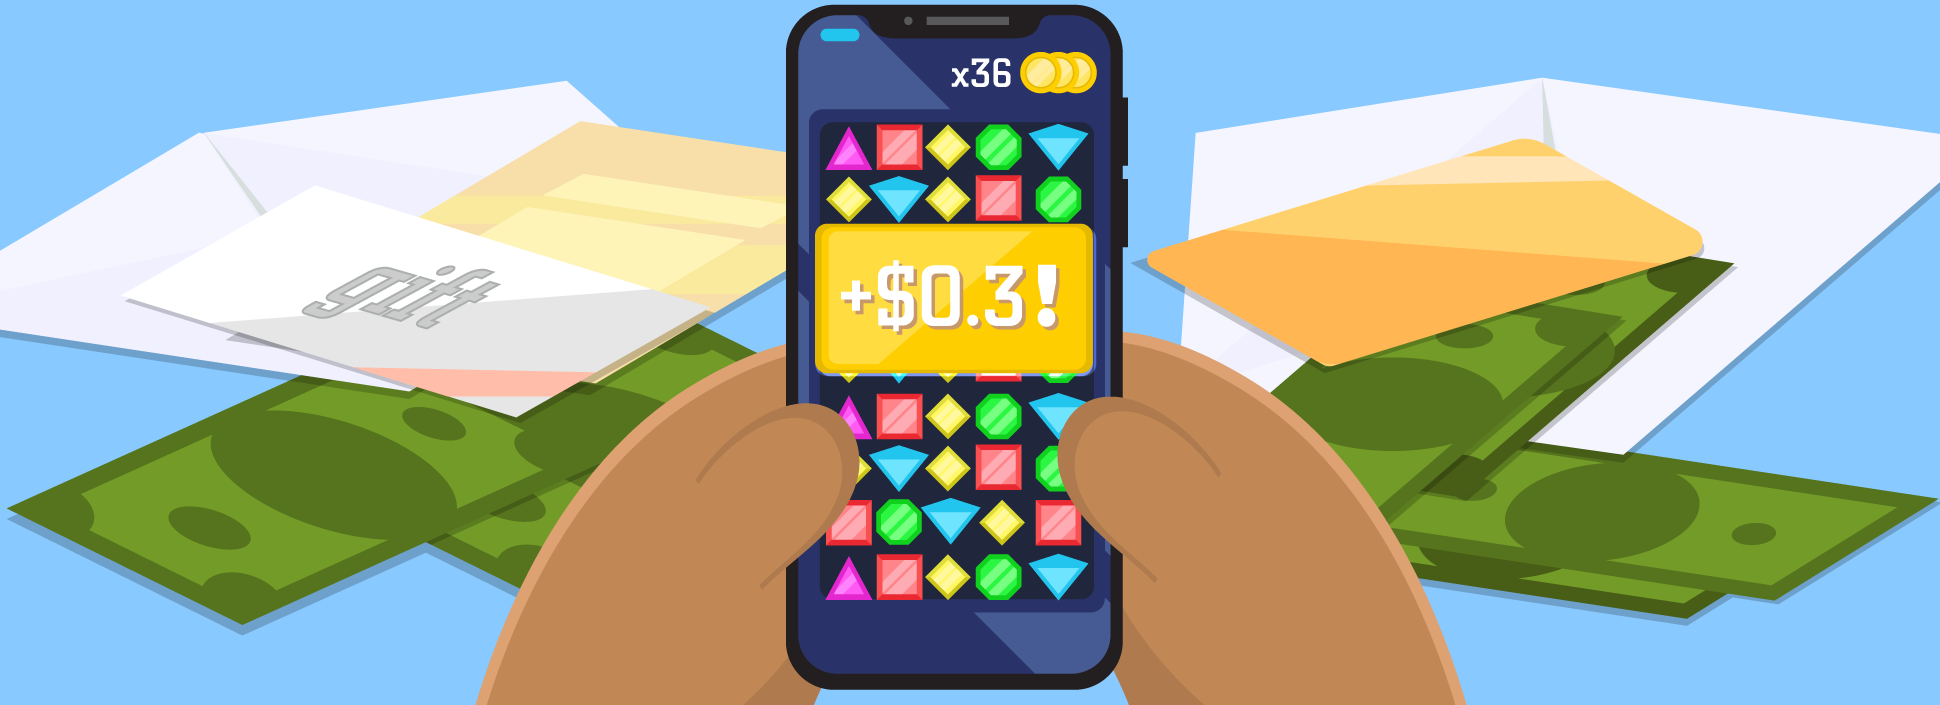 Top 10 Apps That Give You Real Cash To Play Games